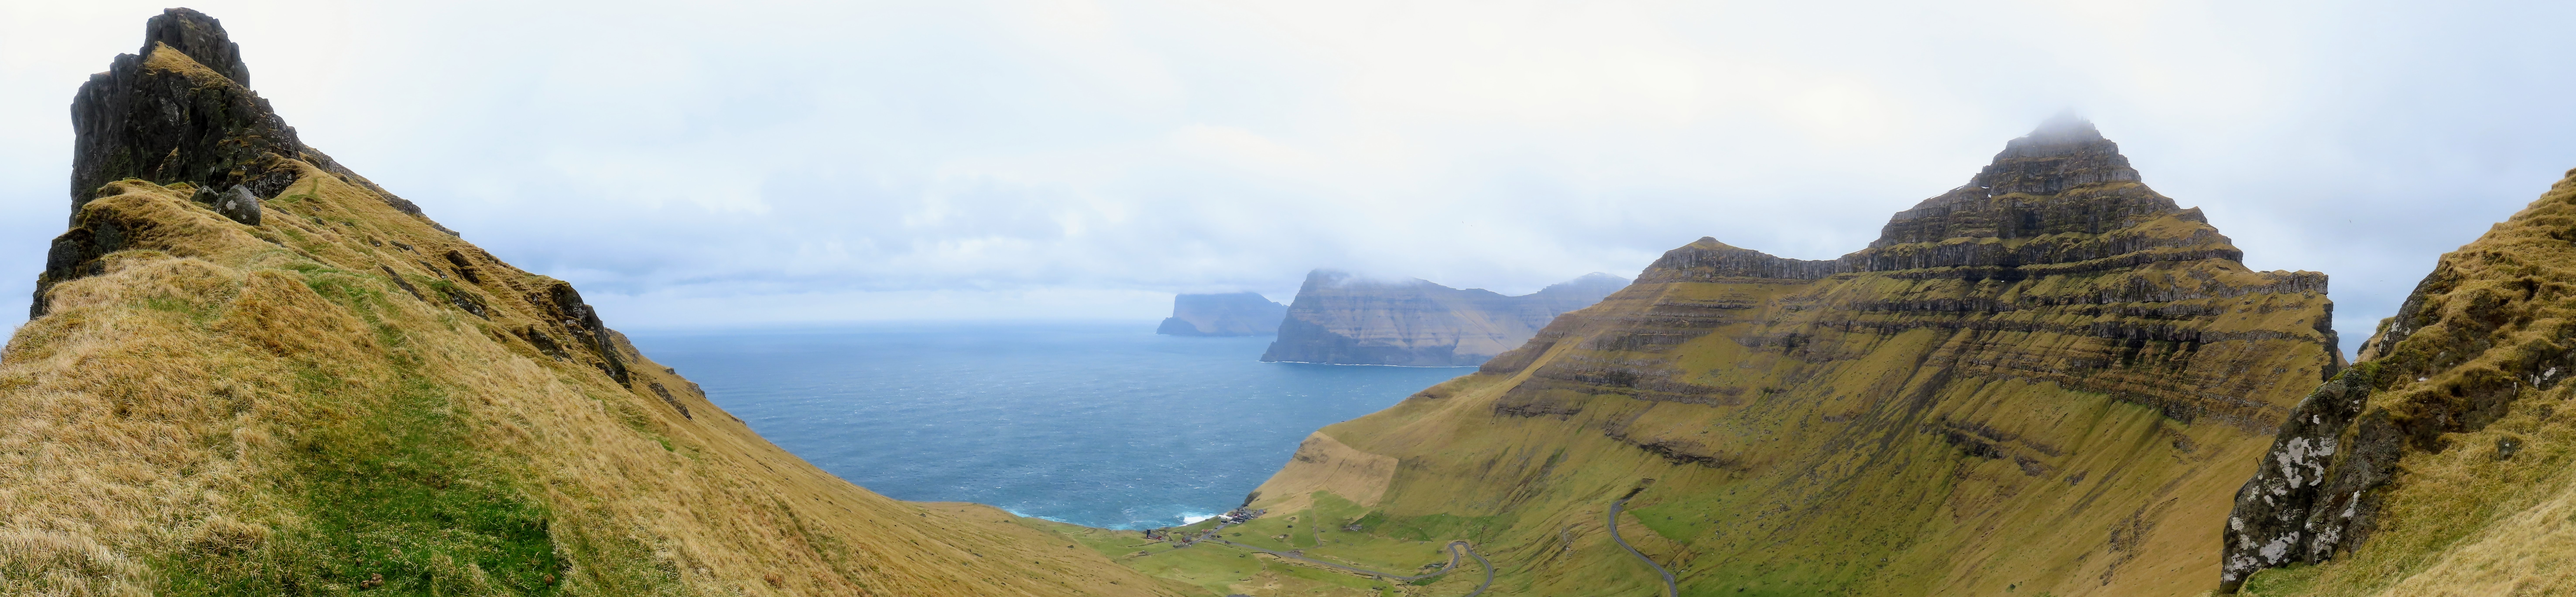 Trøllanes in the Faroe Islands, viewed from the cliff edge above the town